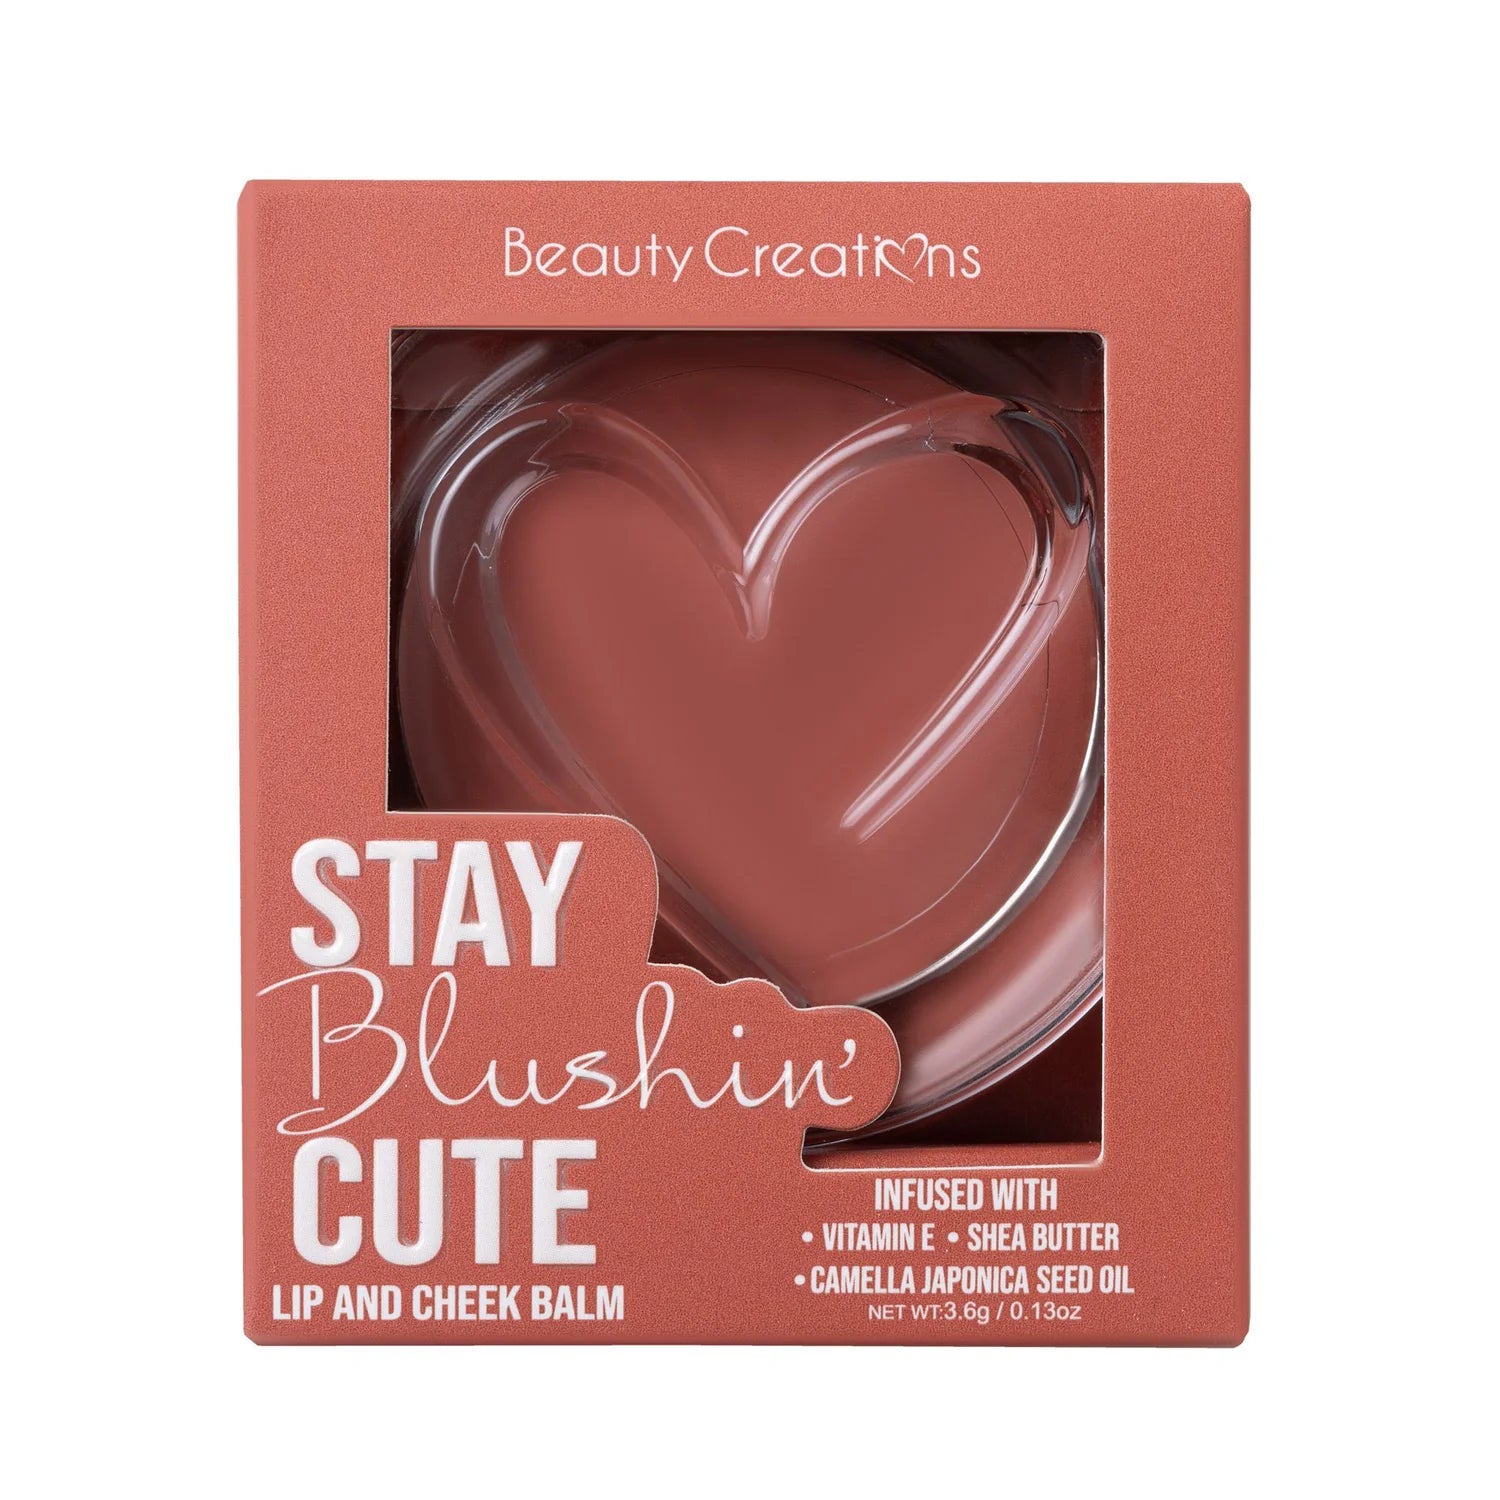 Beauty Creations - Stay Blushing Cute Lip And Cheek Balm - Don't Say It Twice